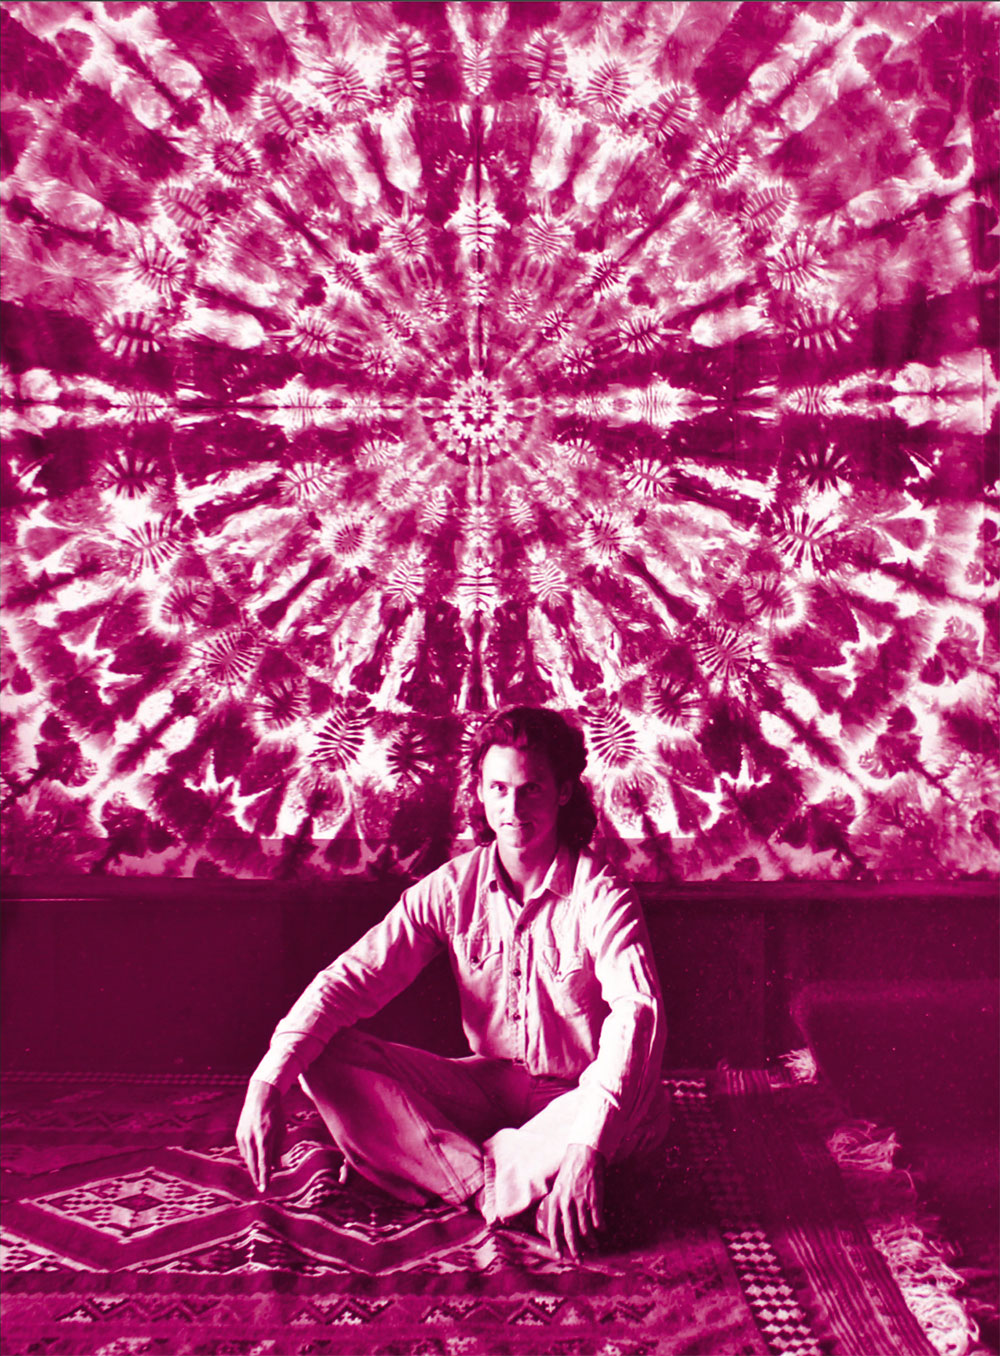 Courtenay Pollock in front of his Geometriart tie-dye pattern used for the Grateful Dead